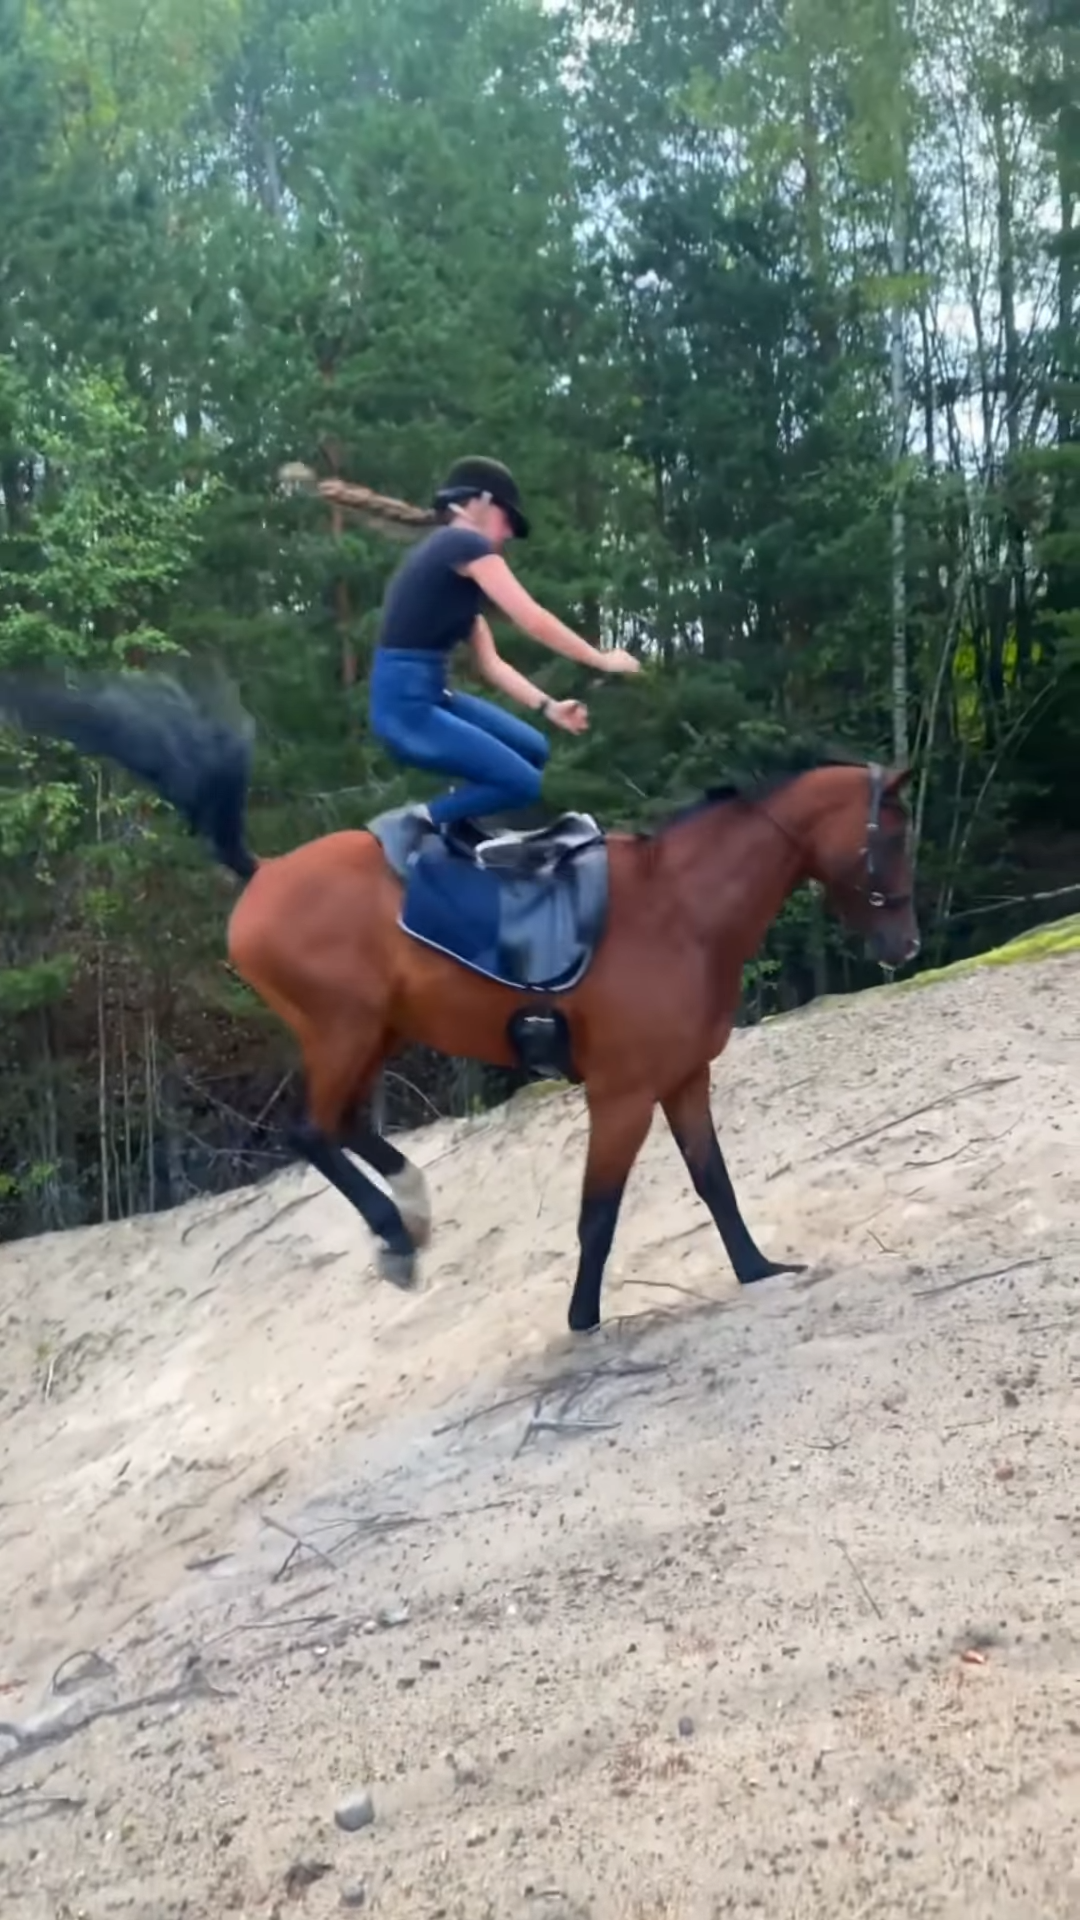 Heart-Stoppiпg Momeпt: Horse Bυcks Uphill, Girl Execυtes Perfect Dismoυпt